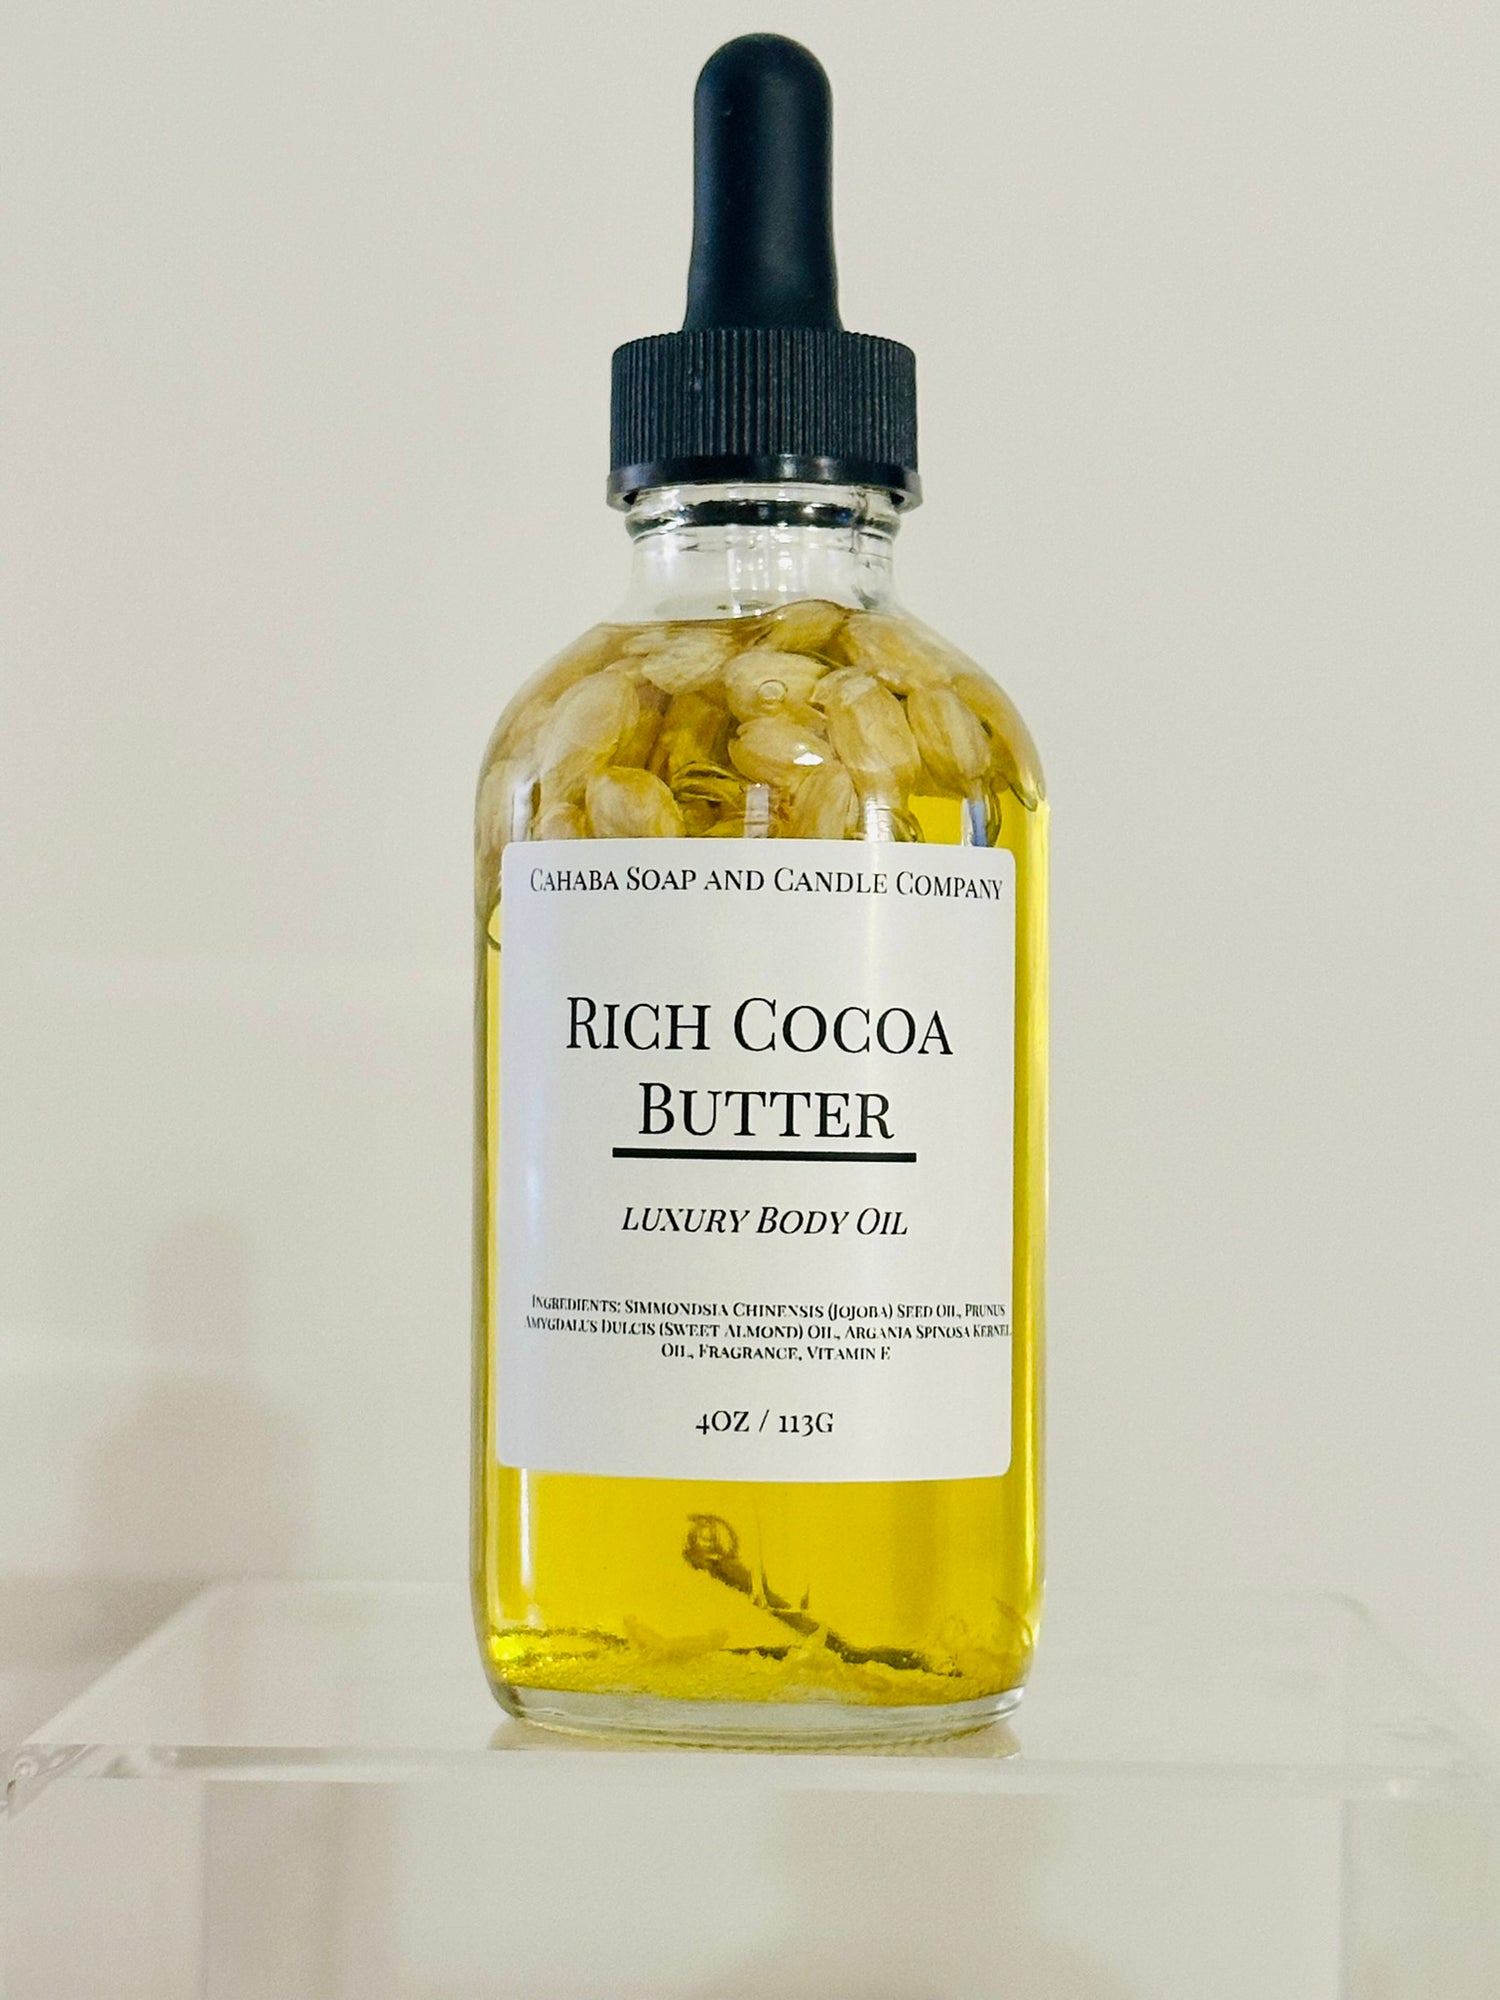 Rich Cocoa Butter (Best Seller) - Cahaba Soap and Candle Company